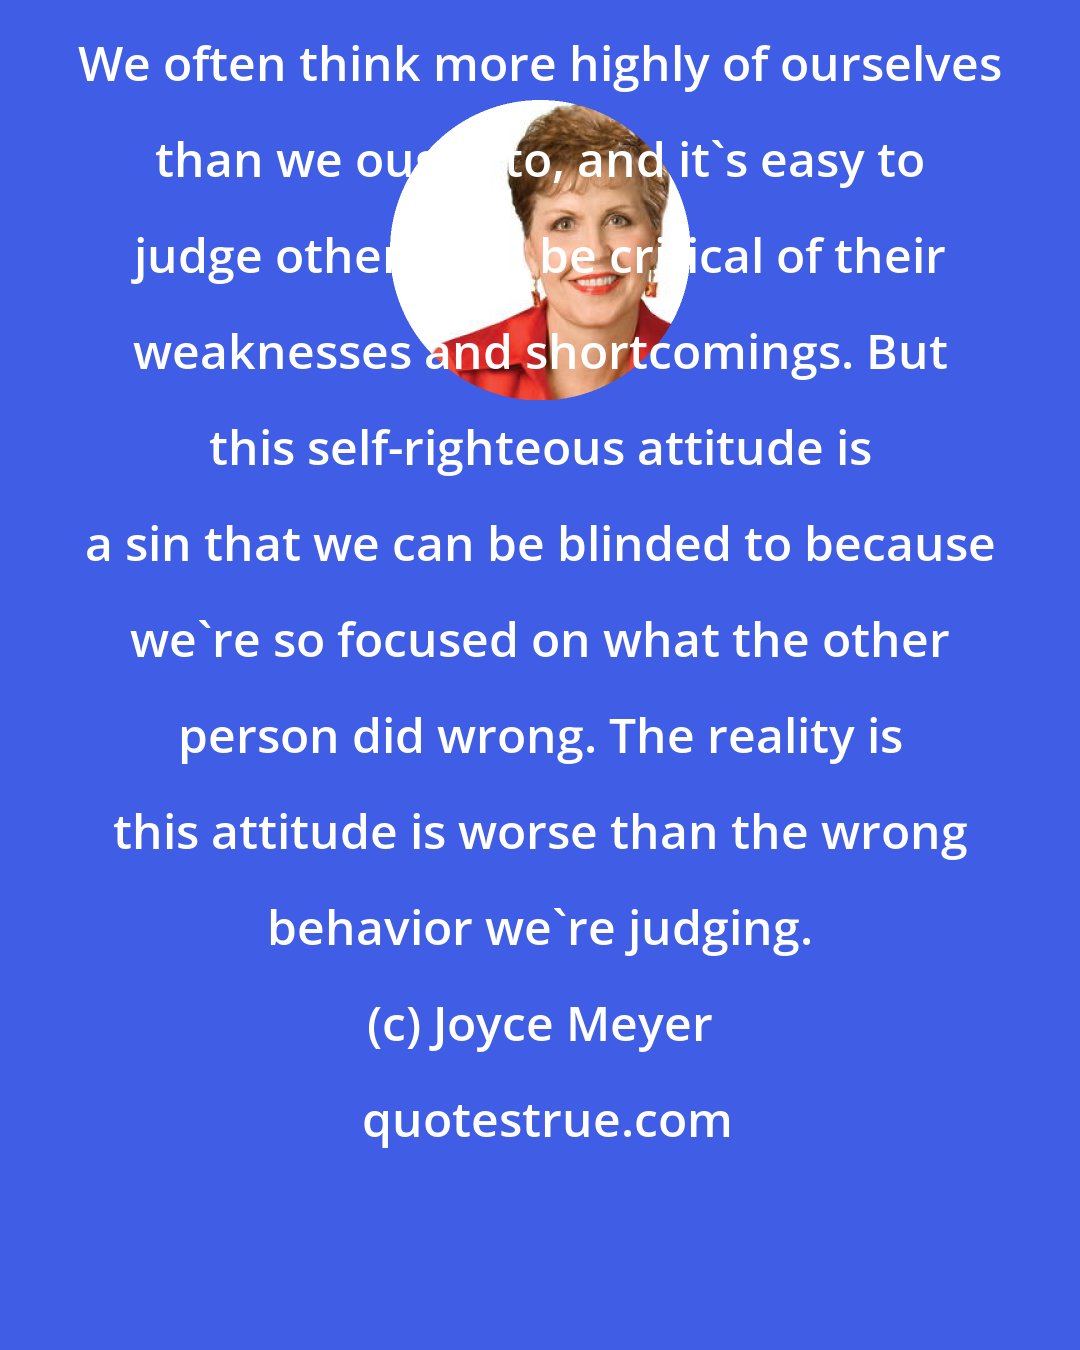 Joyce Meyer: We often think more highly of ourselves than we ought to, and it's easy to judge others and be critical of their weaknesses and shortcomings. But this self-righteous attitude is a sin that we can be blinded to because we're so focused on what the other person did wrong. The reality is this attitude is worse than the wrong behavior we're judging.